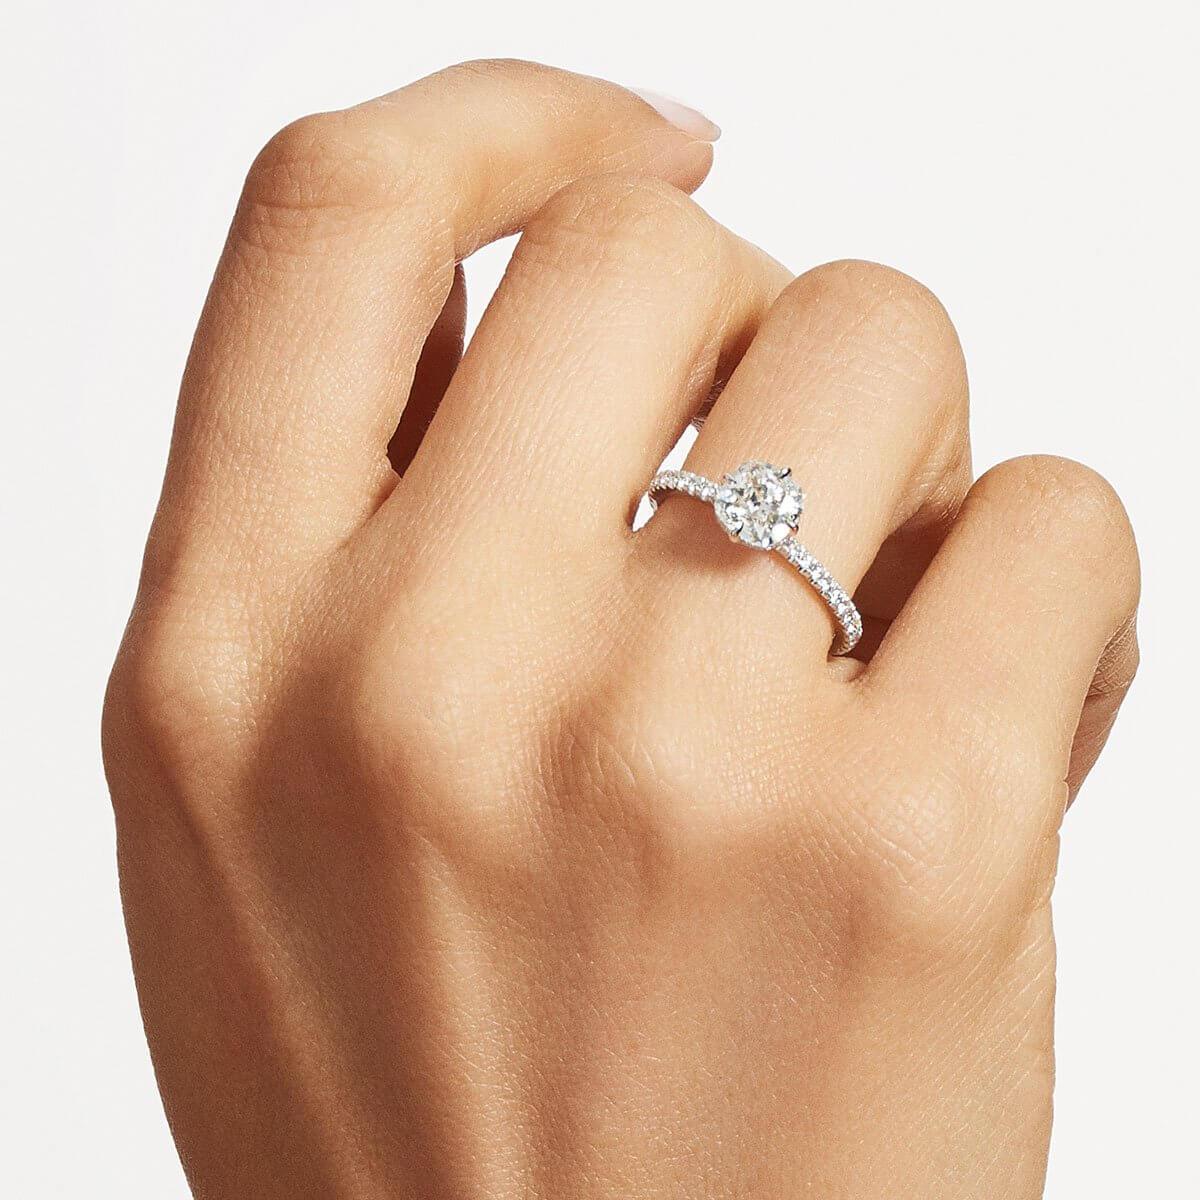 The 16 Best Engagement Rings by New Designers